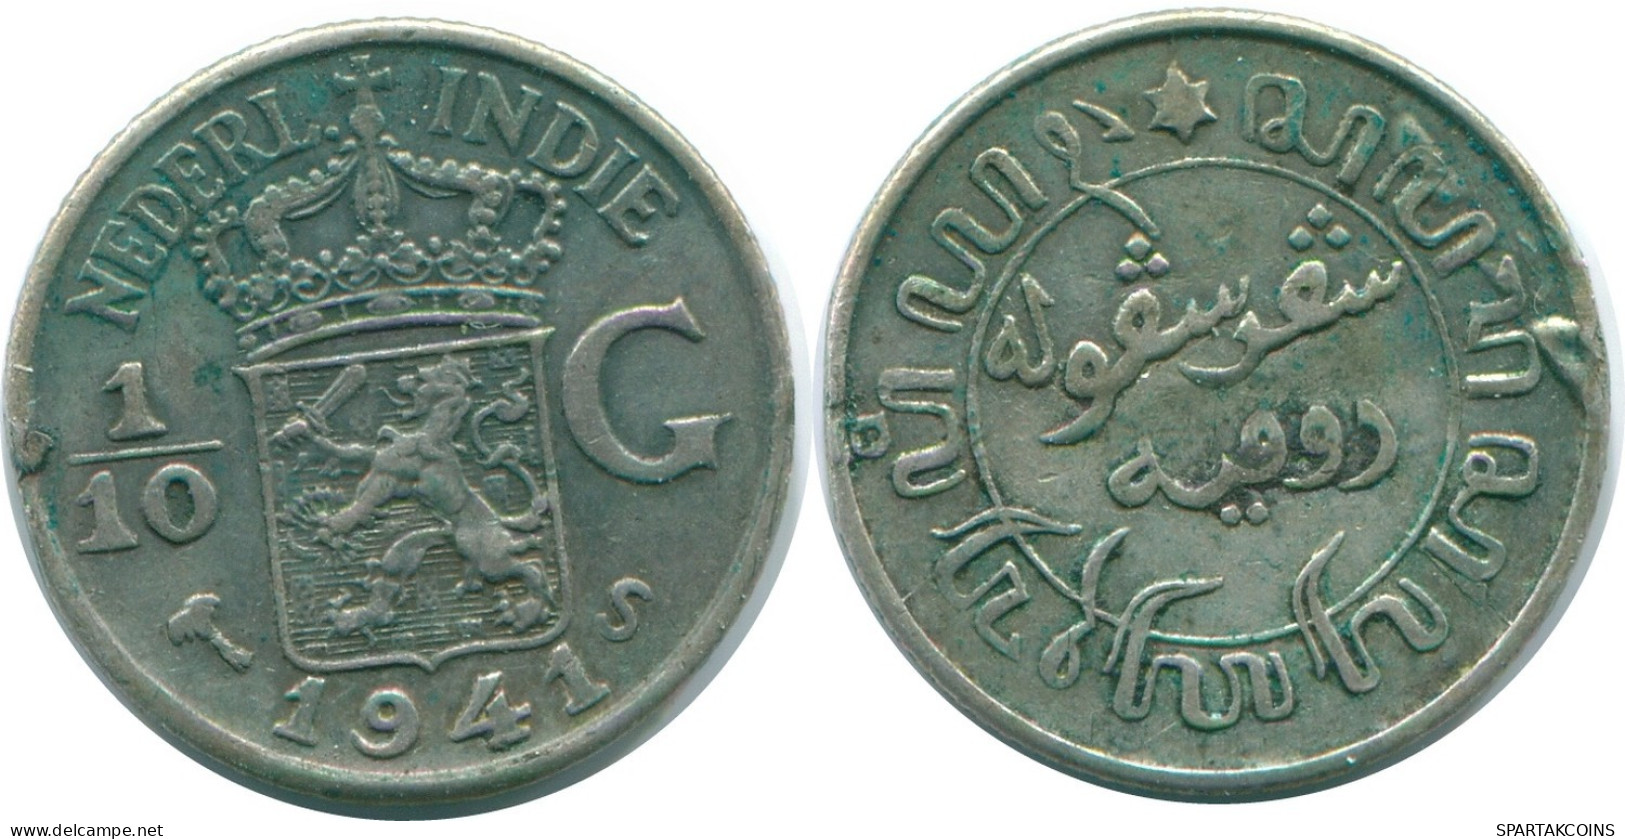 1/10 GULDEN 1941 S NETHERLANDS EAST INDIES SILVER Colonial Coin #NL13699.3.U.A - Indes Neerlandesas